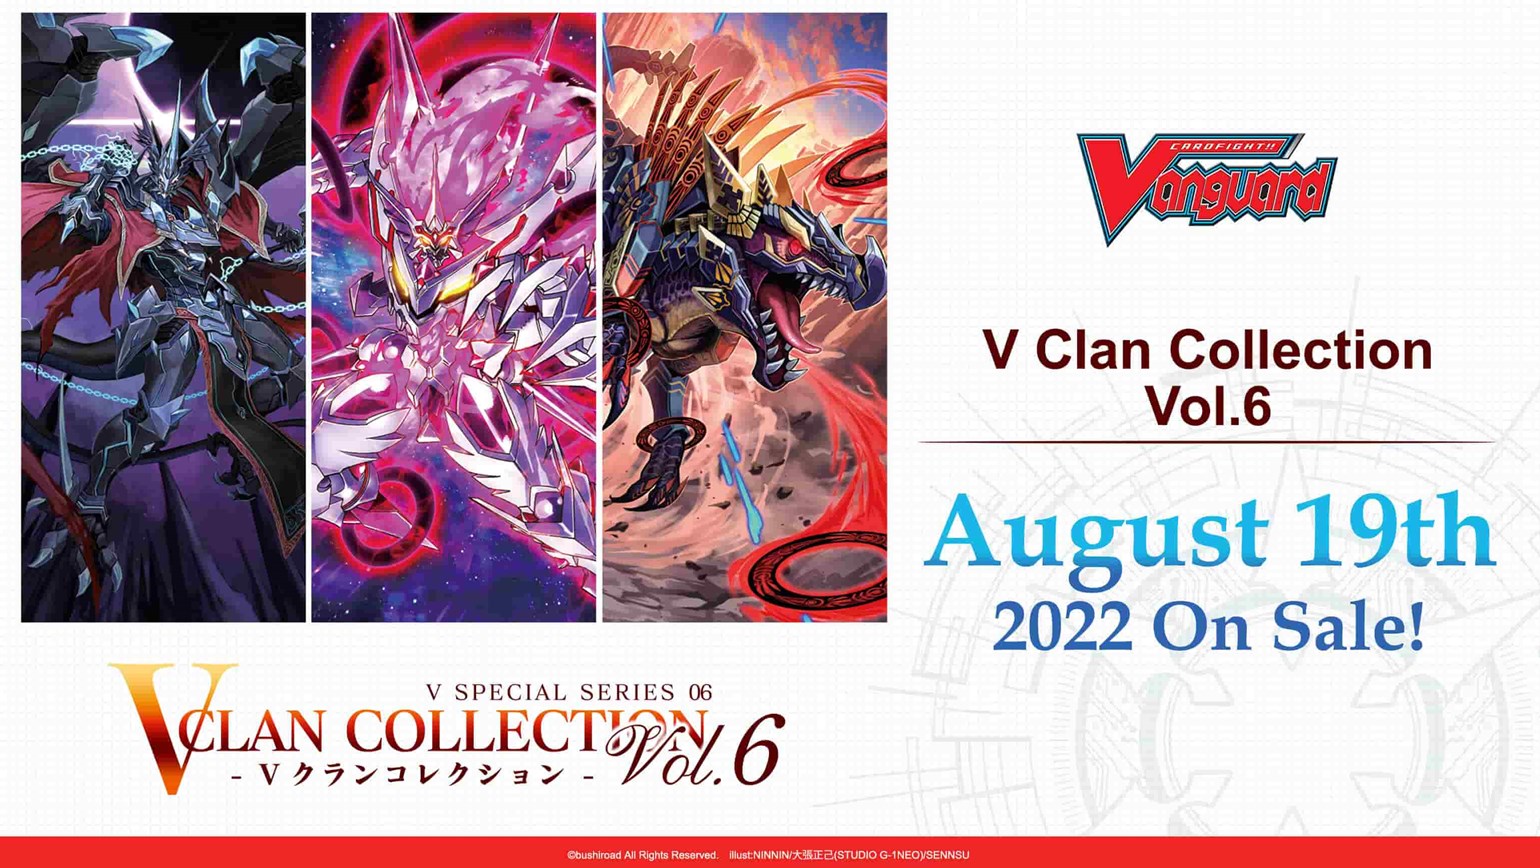 New English Edition overDress V Special Series 06: V Clan Collection Vol.6, Coming to Stores on August 19th!